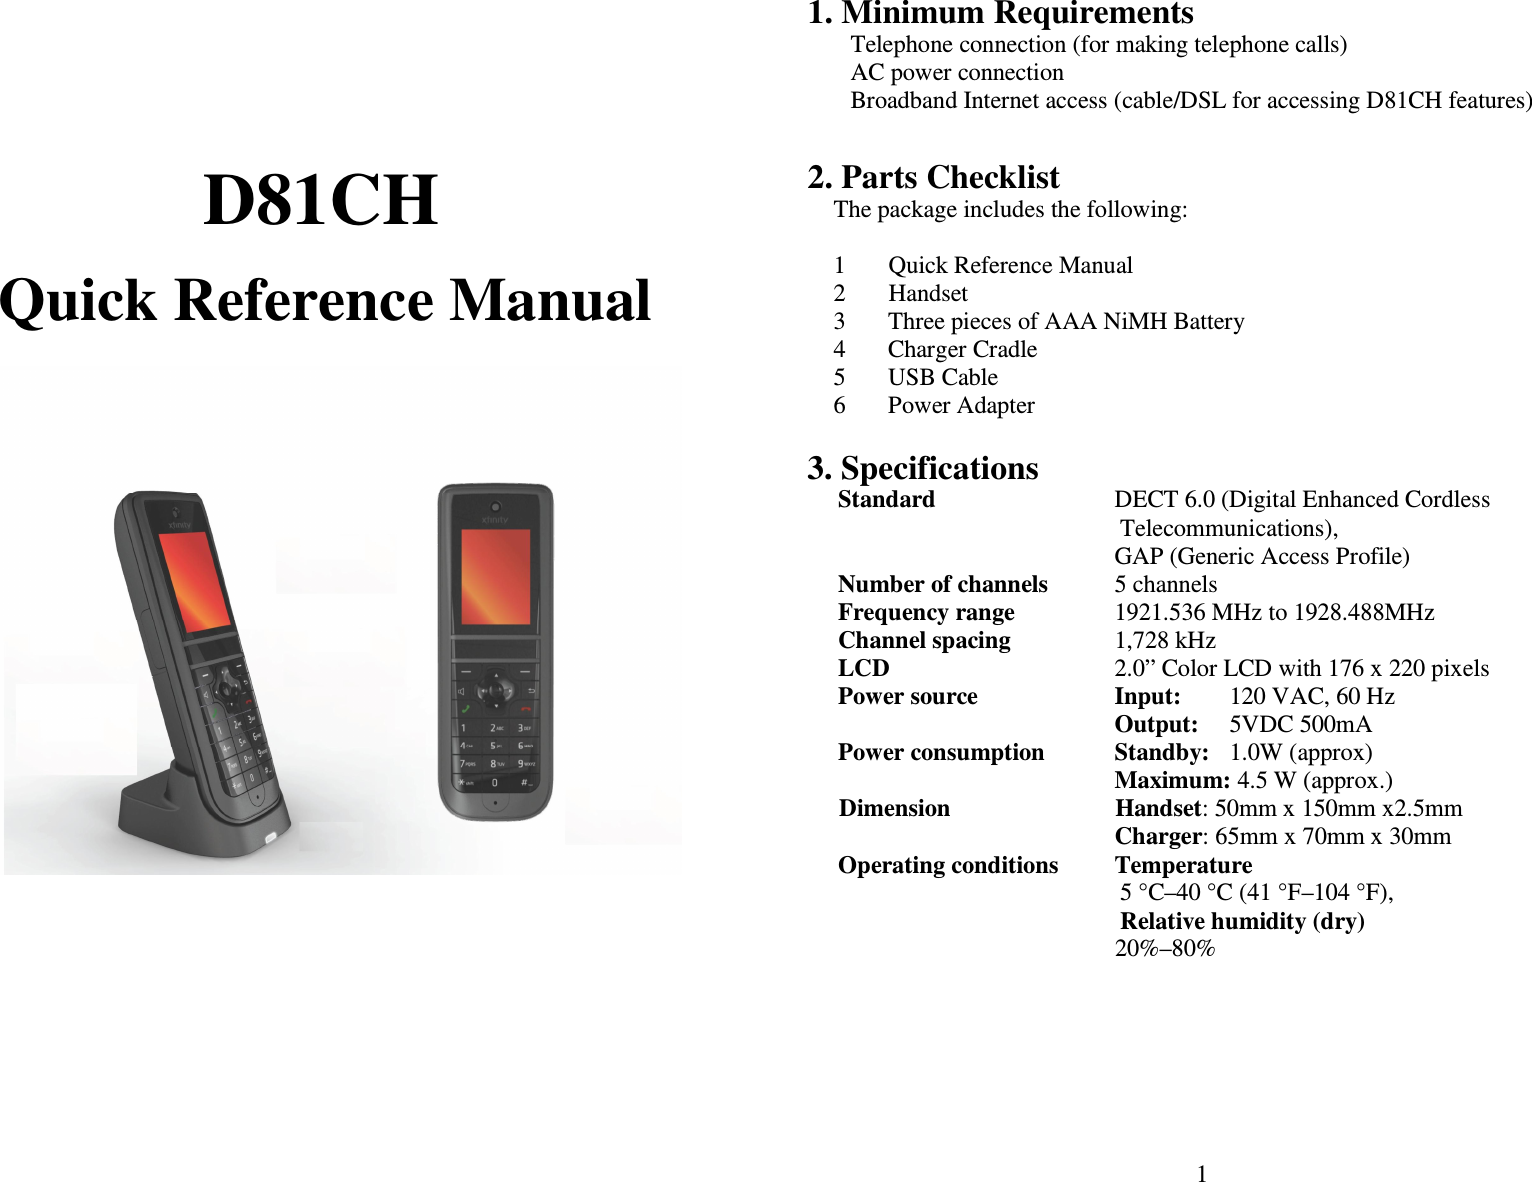   D81CH  Quick Reference Manual     1  1. Minimum Requirements Telephone connection (for making telephone calls)   AC power connection Broadband Internet access (cable/DSL for accessing D81CH features)  2. Parts Checklist The package includes the following:  1       Quick Reference Manual 2       Handset 3  Three pieces of AAA NiMH Battery 4  Charger Cradle 5  USB Cable 6  Power Adapter  3. Specifications Standard  DECT 6.0 (Digital Enhanced Cordless Telecommunications),   GAP (Generic Access Profile) Number of channels  5 channels Frequency range  1921.536 MHz to 1928.488MHz Channel spacing  1,728 kHz LCD  2.0” Color LCD with 176 x 220 pixels Power source  Input:   120 VAC, 60 Hz   Output:  5VDC 500mA Power consumption  Standby:   1.0W (approx)   Maximum: 4.5 W (approx.)         Dimension                           Handset: 50mm x 150mm x2.5mm           Charger: 65mm x 70mm x 30mm                              Operating conditions  Temperature 5 °C–40 °C (41 °F–104 °F), Relative humidity (dry) 20%–80% 